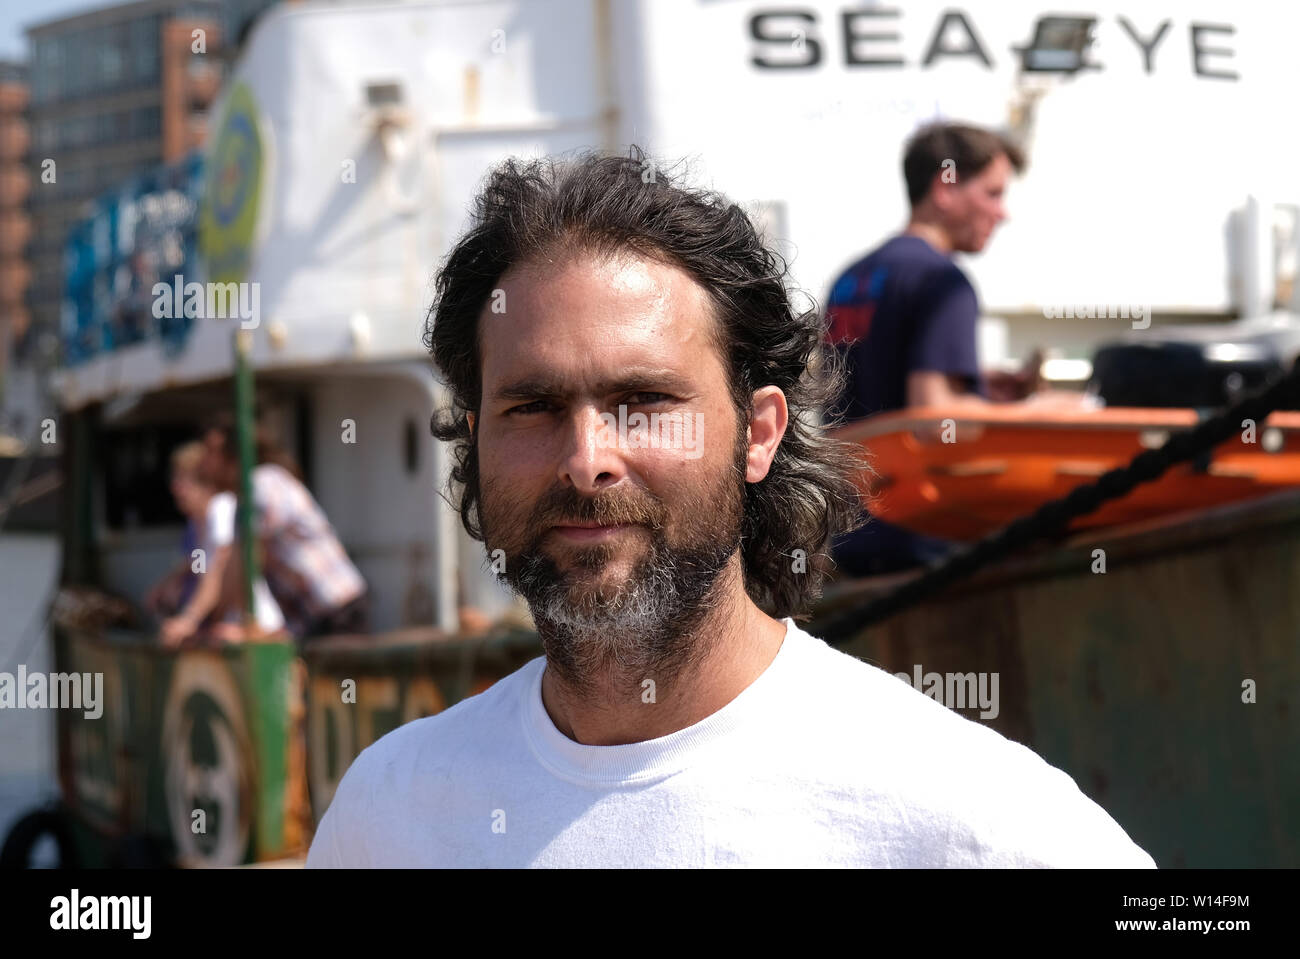 30 June 2019, Hamburg: Michael Buschheuer, founder of the organization Sea-Eye, stands in front of the rescue ship 'Sea-Eye' in the harbour. The Regensburg aid organization Sea-Eye wants to bring its decommissioned rescue ship of the same name to the museum in Hamburg. Photo: Daniel Bockwoldt/dpa Stock Photo